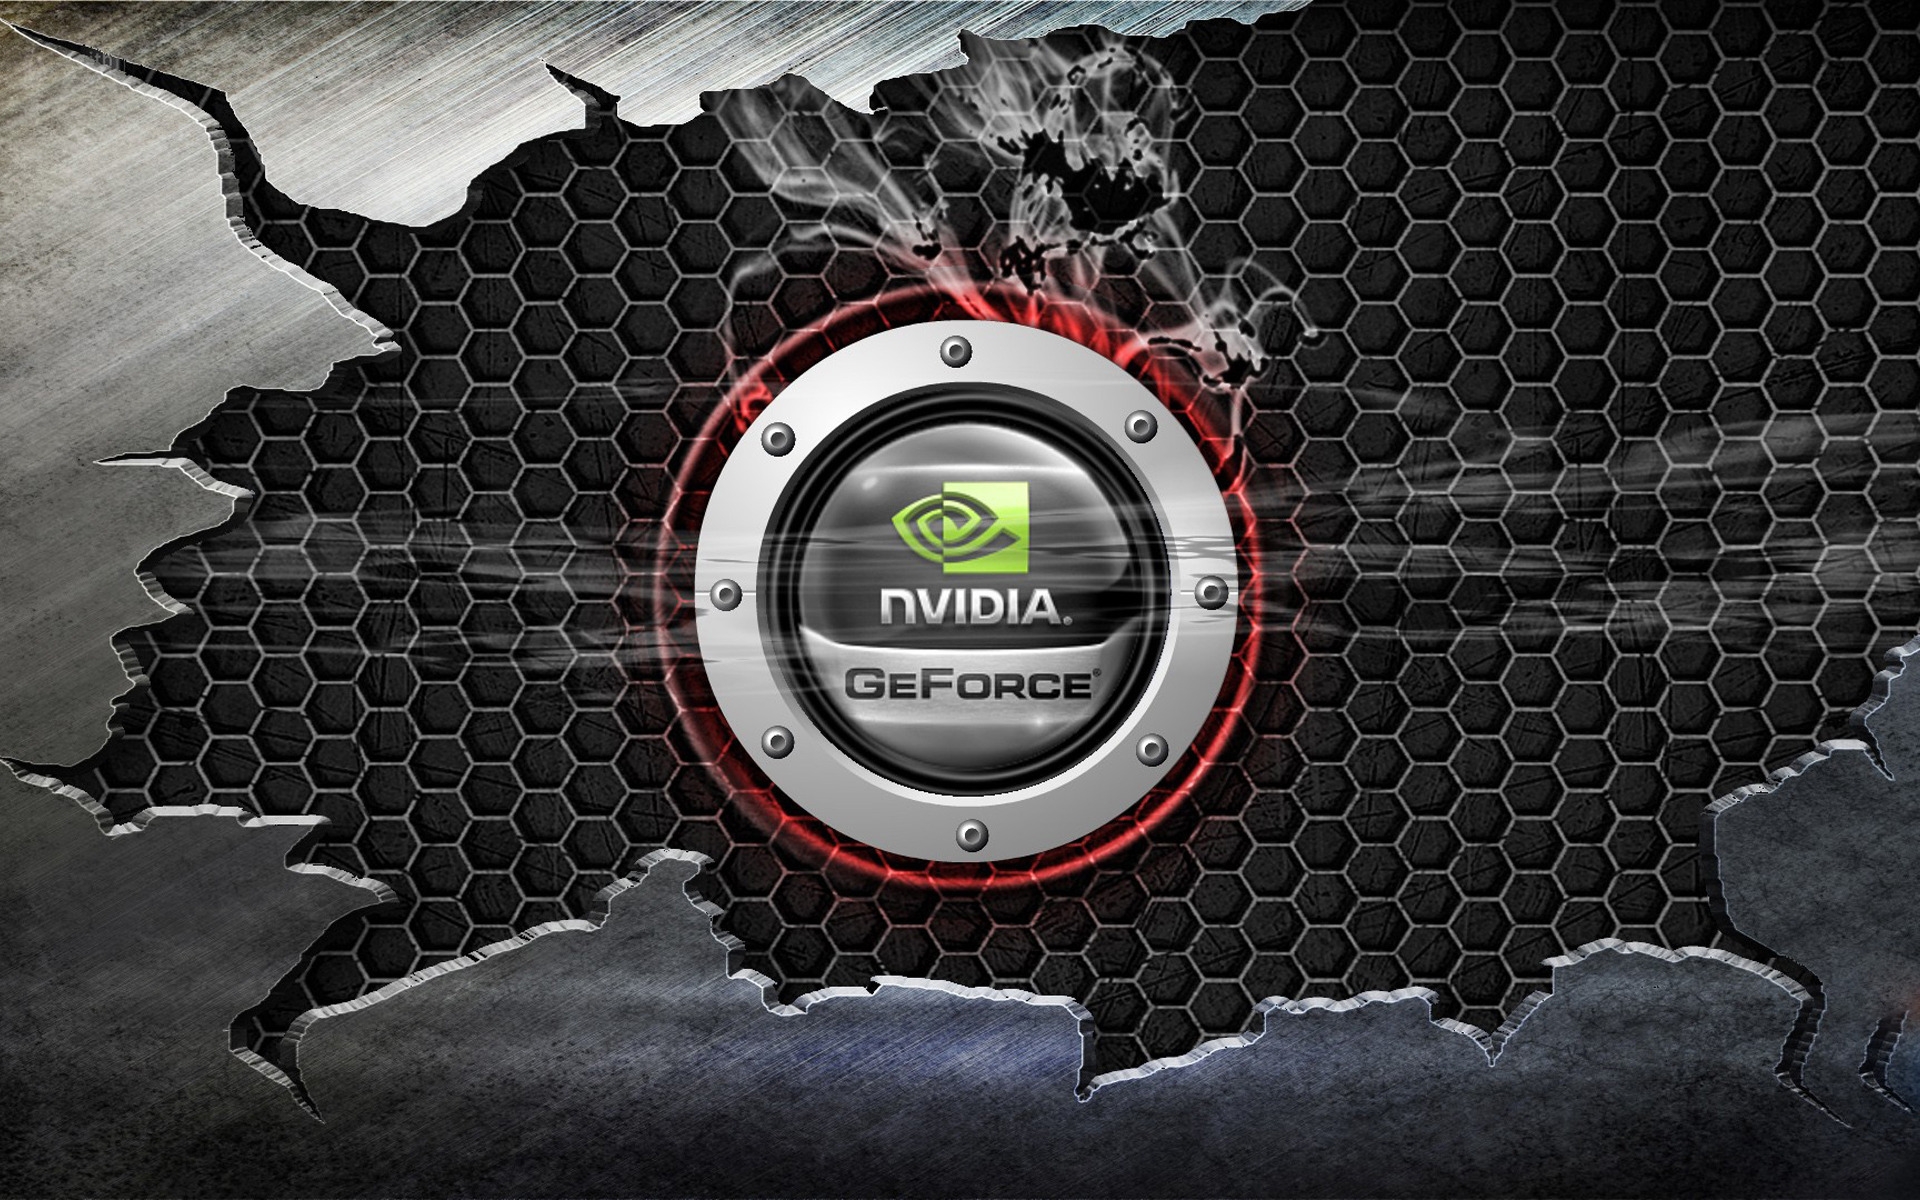 nVIDIA for 1920 x 1200 widescreen resolution